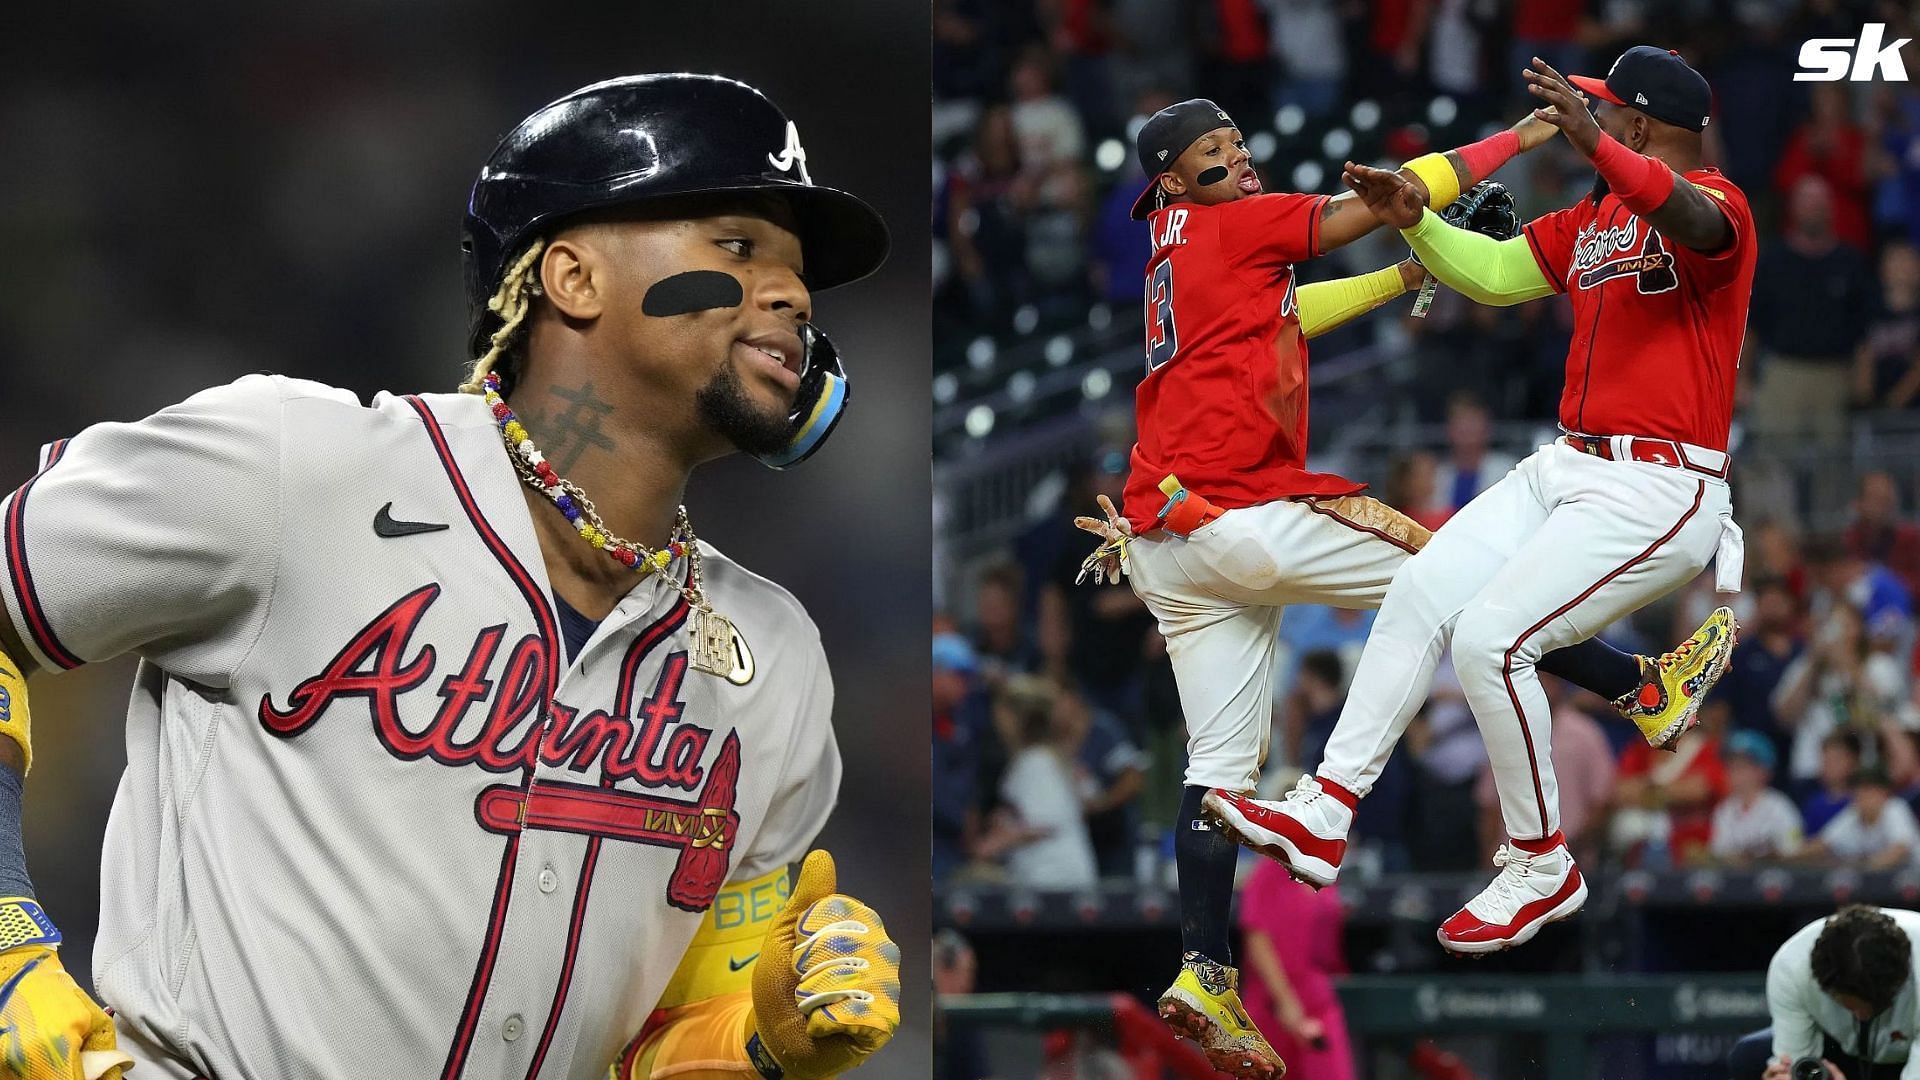 Ronald Acuña Jr.'s kids melt hearts of fans with adorable antics in the ...